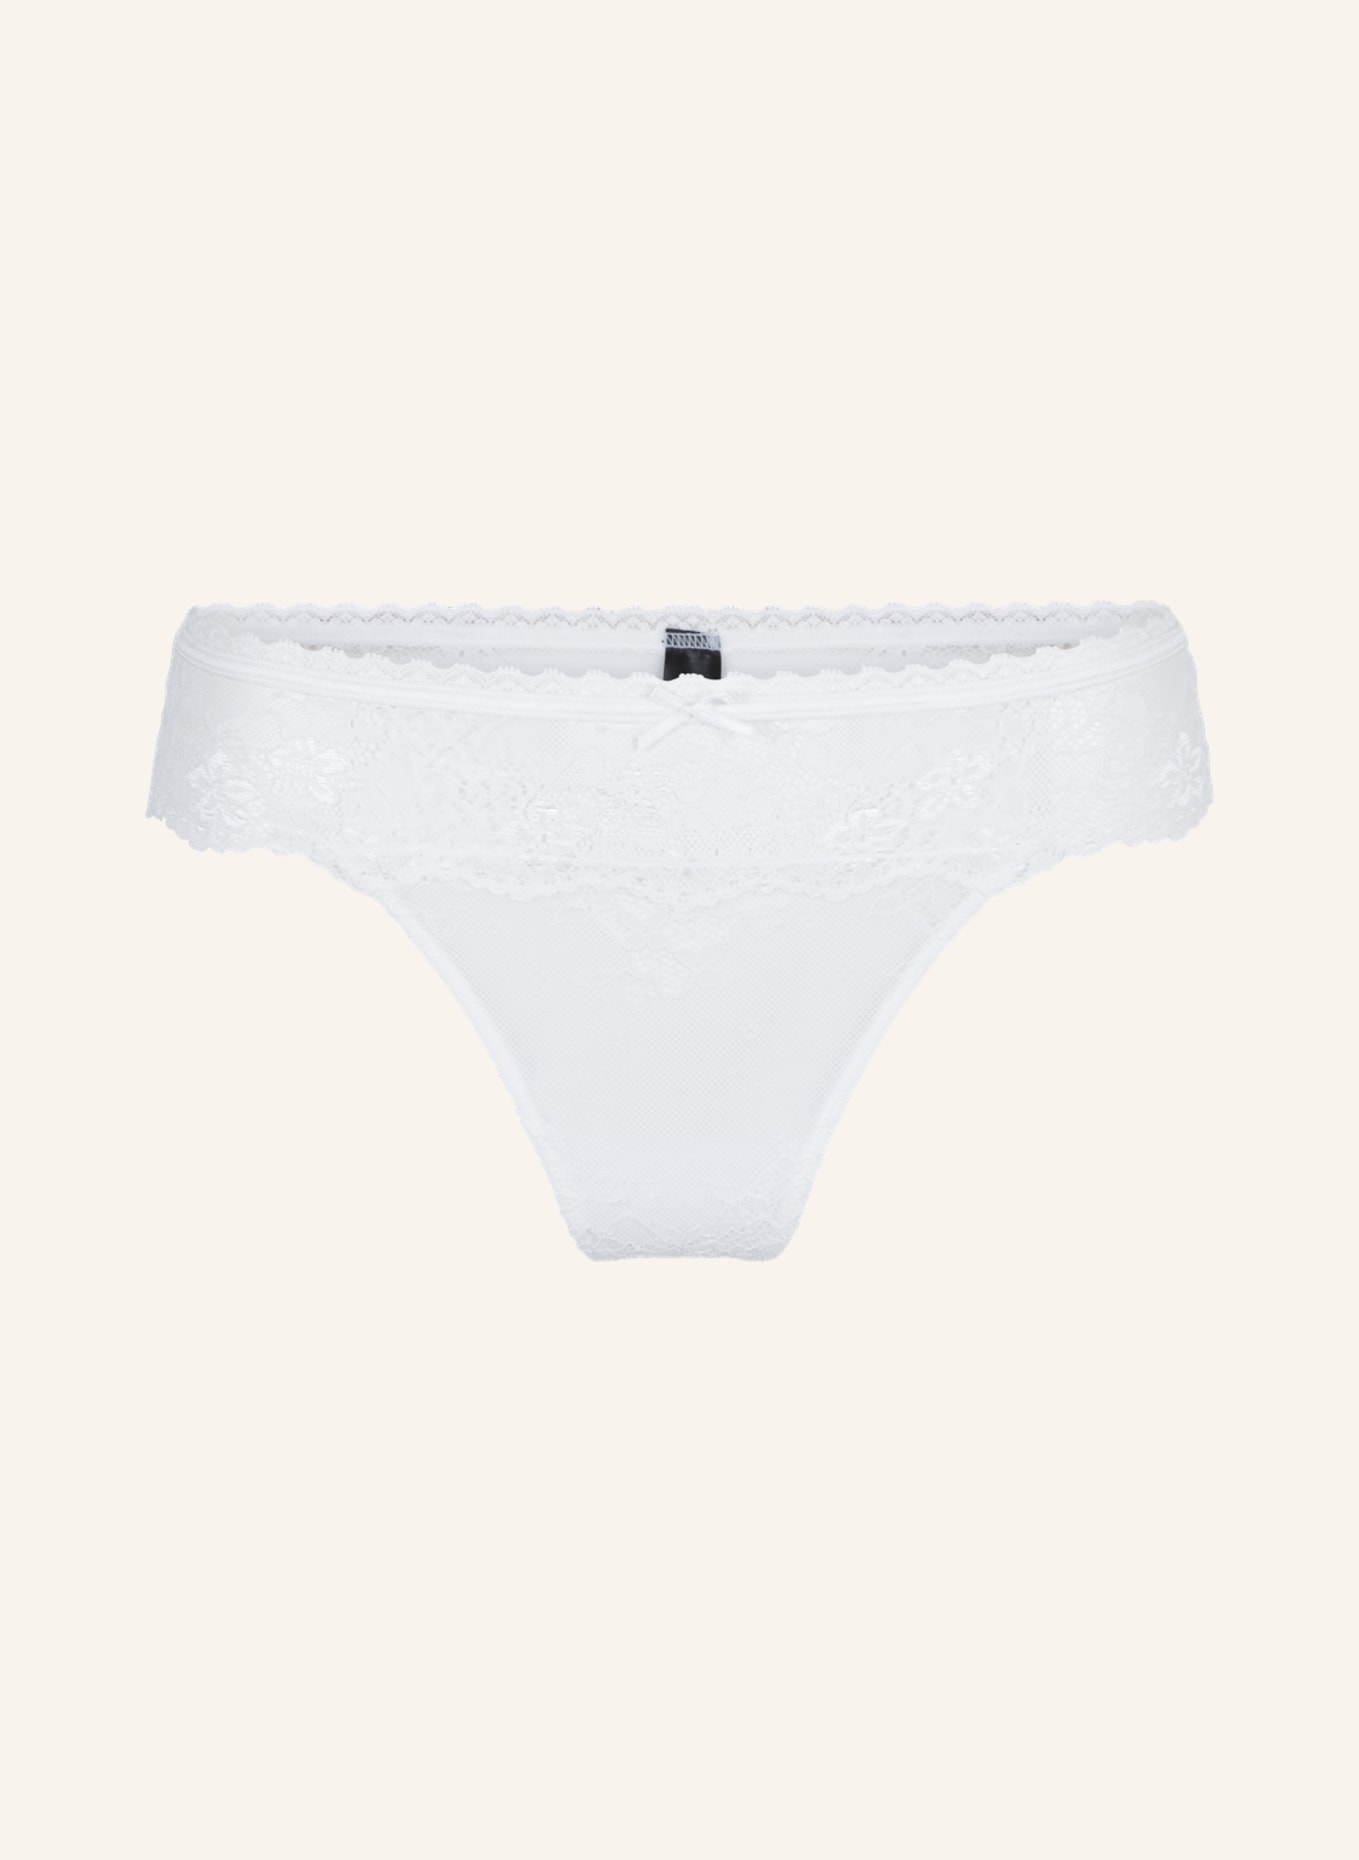 LINGADORE String DAILY, Farbe: WEISS (Bild 1)